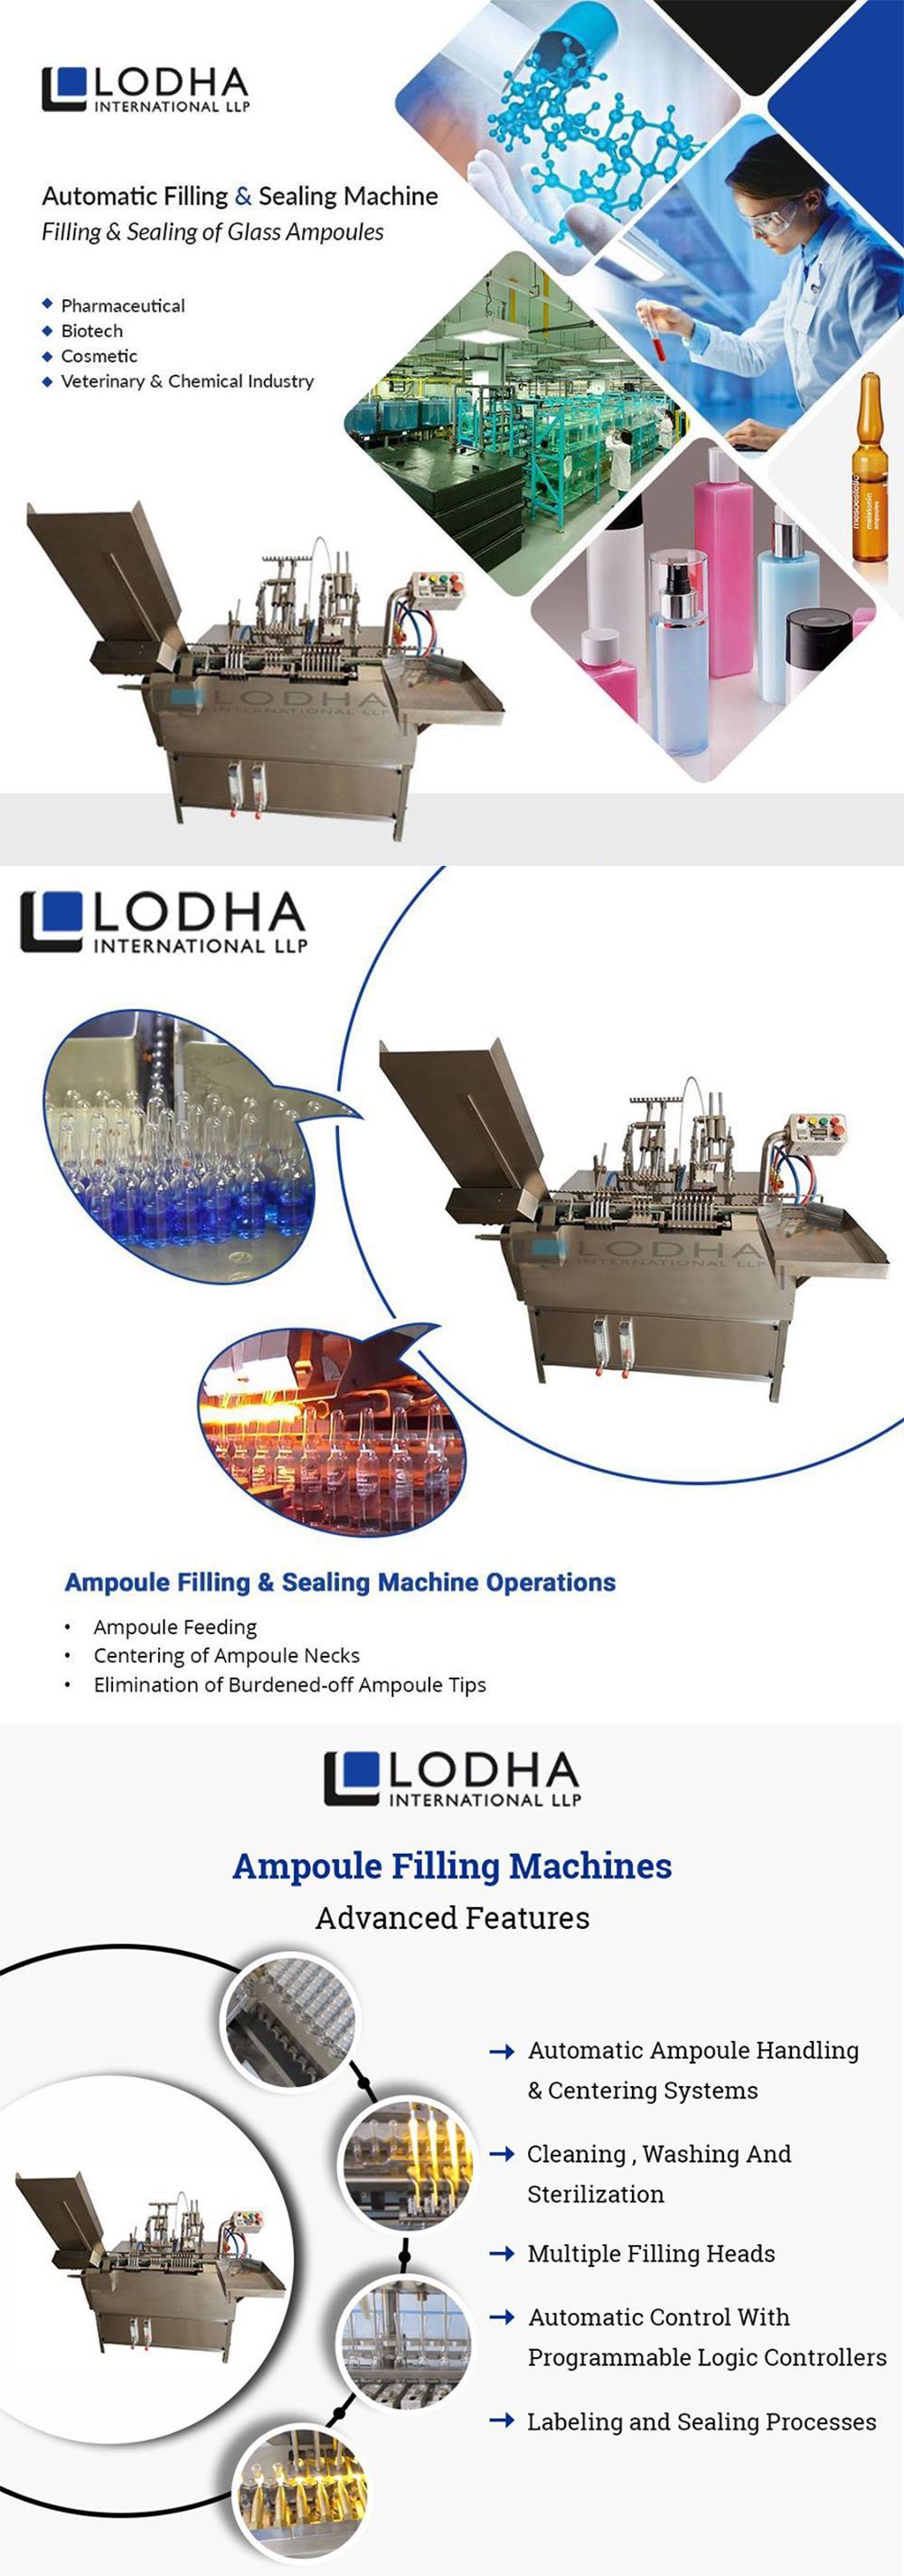 Servo-based Ampoule Filling Machine Market in the USA and Europe